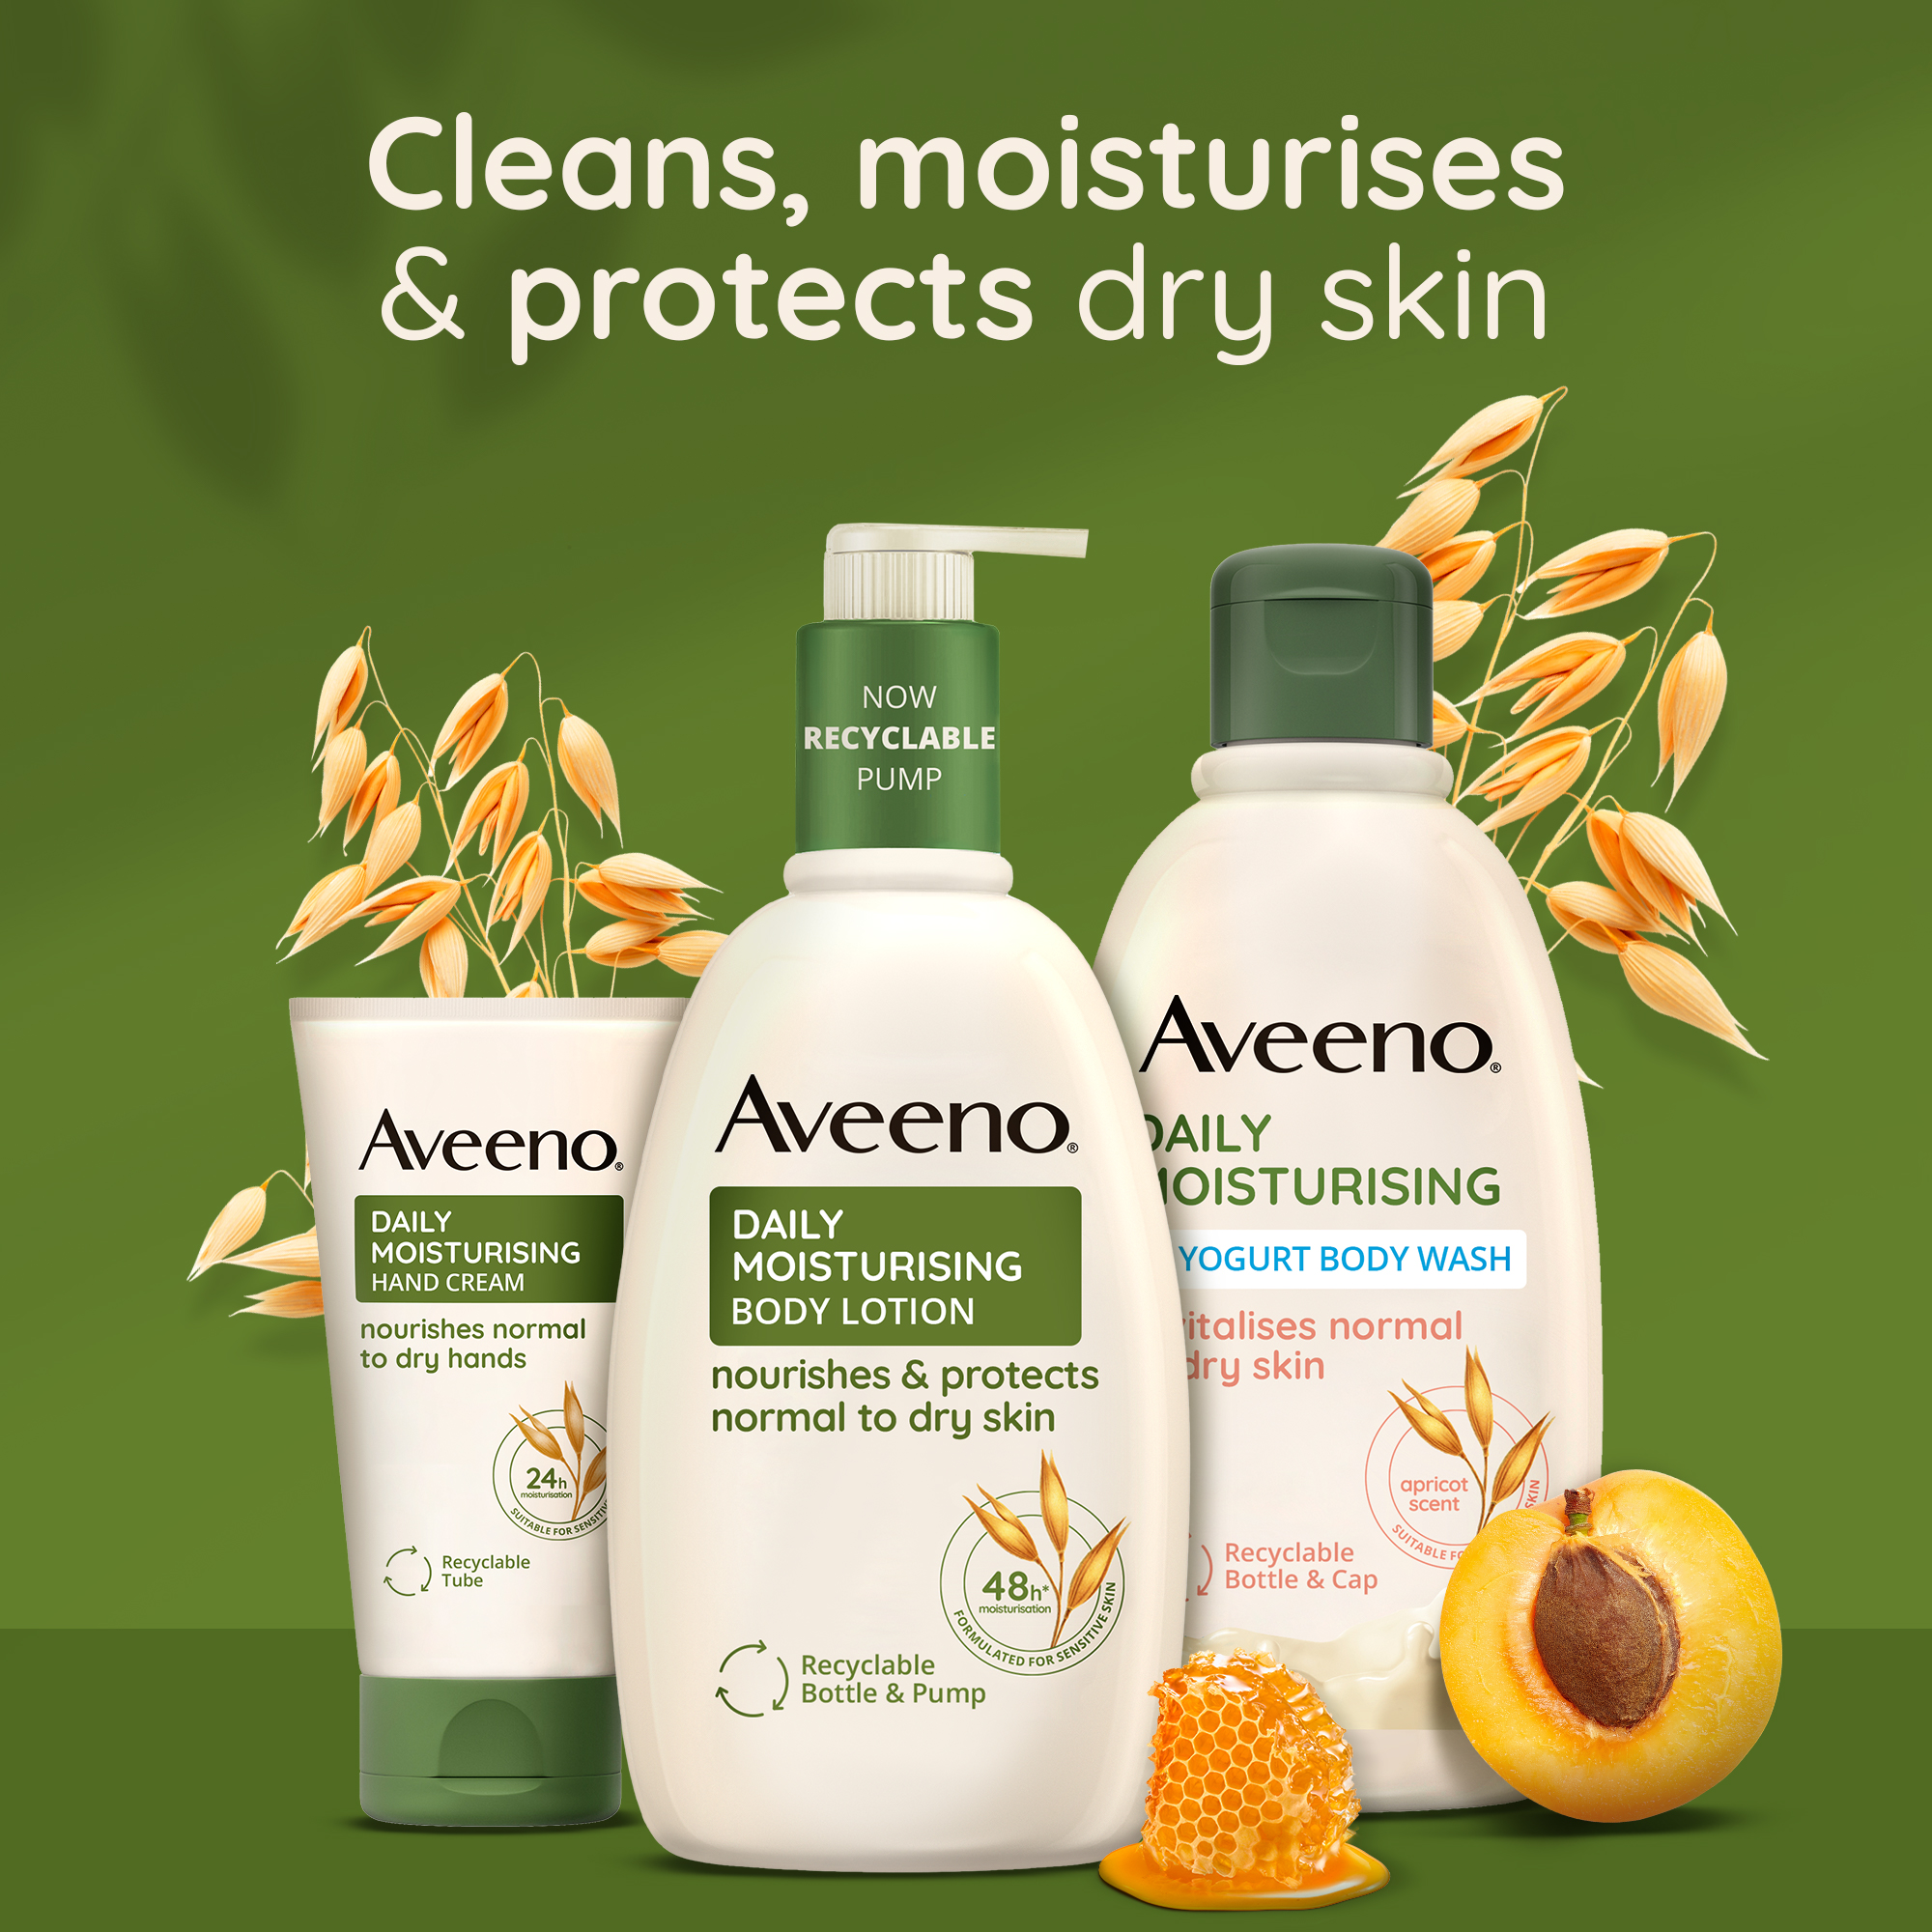 Cleanses, moisturises & protects dry skin